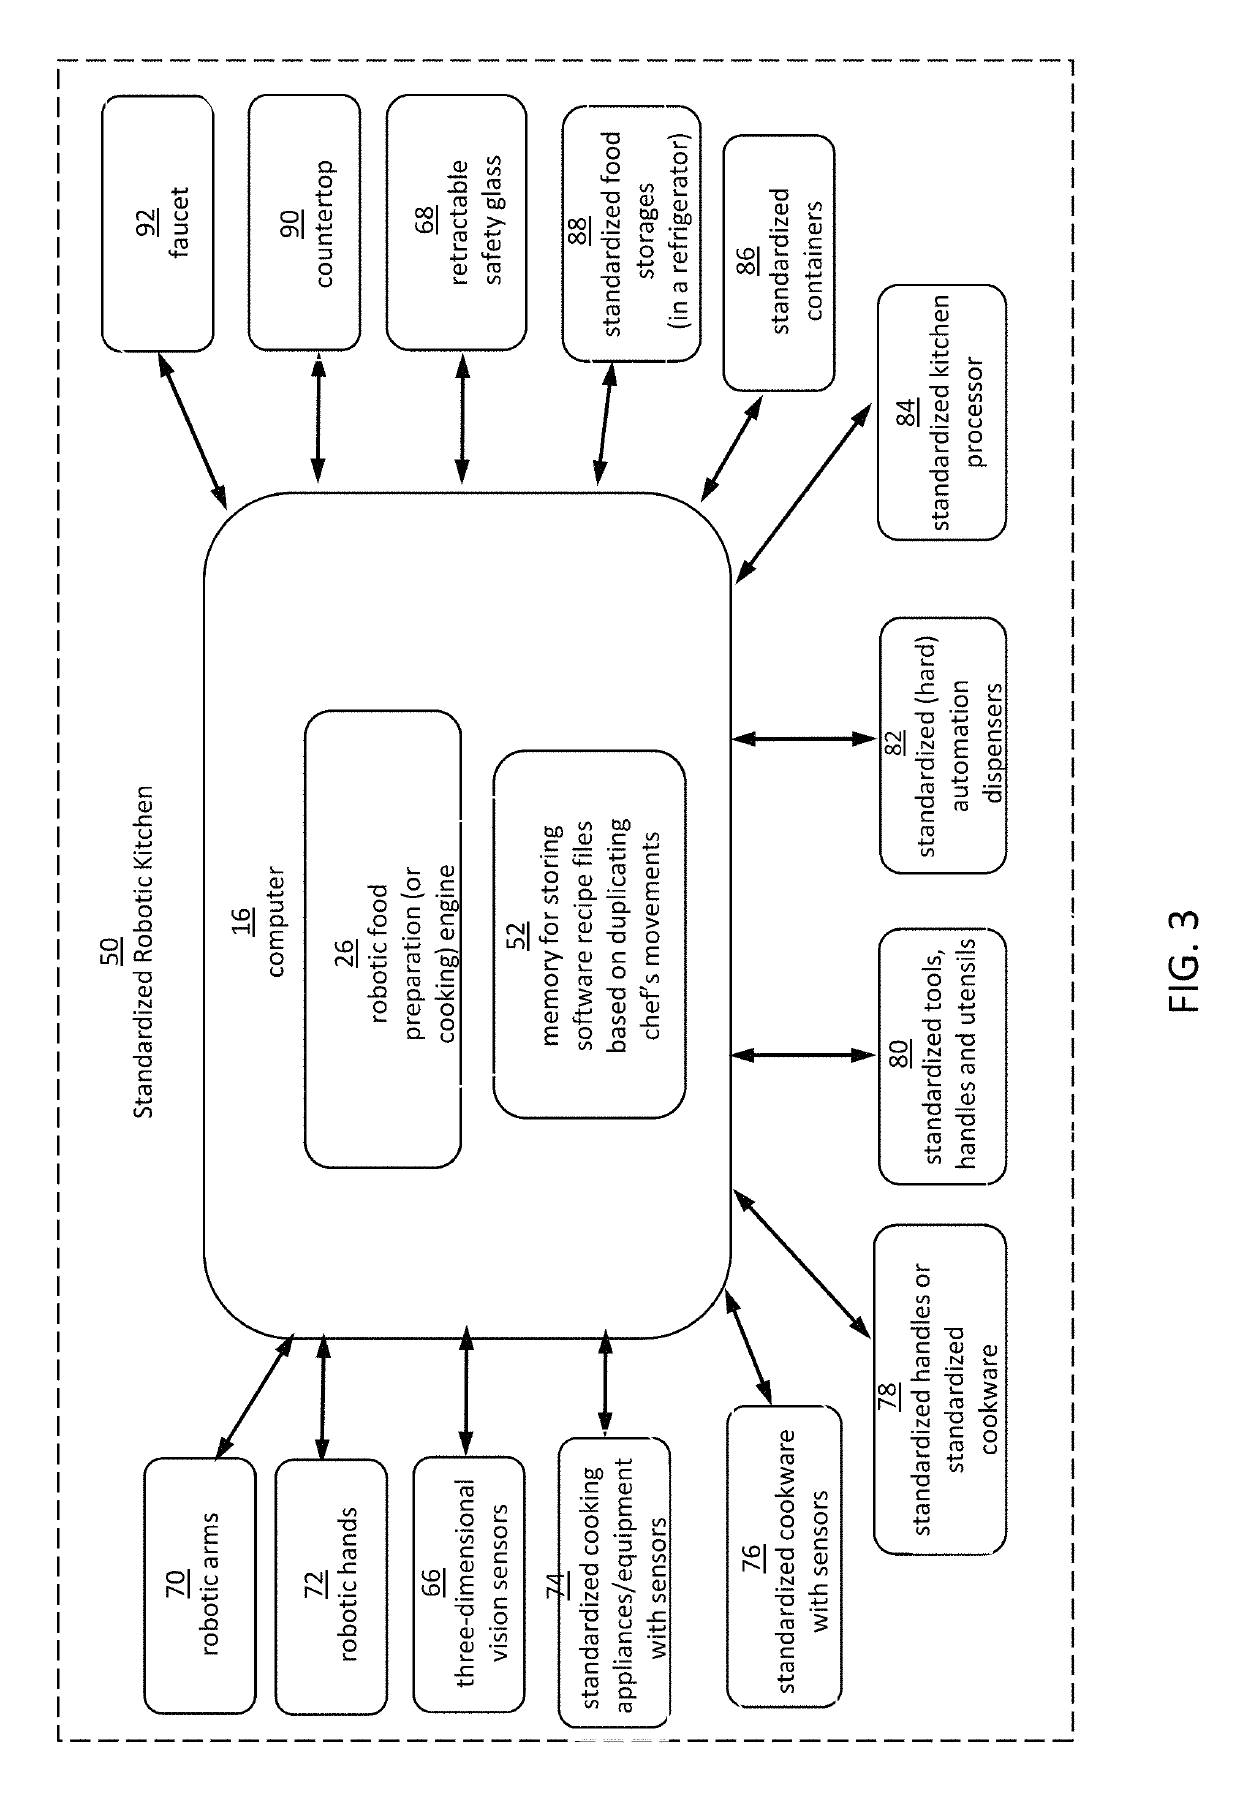 Robotic manipulation methods and systems for executing a domain-specific application in an instrumented environment with electronic minimanipulation libraries